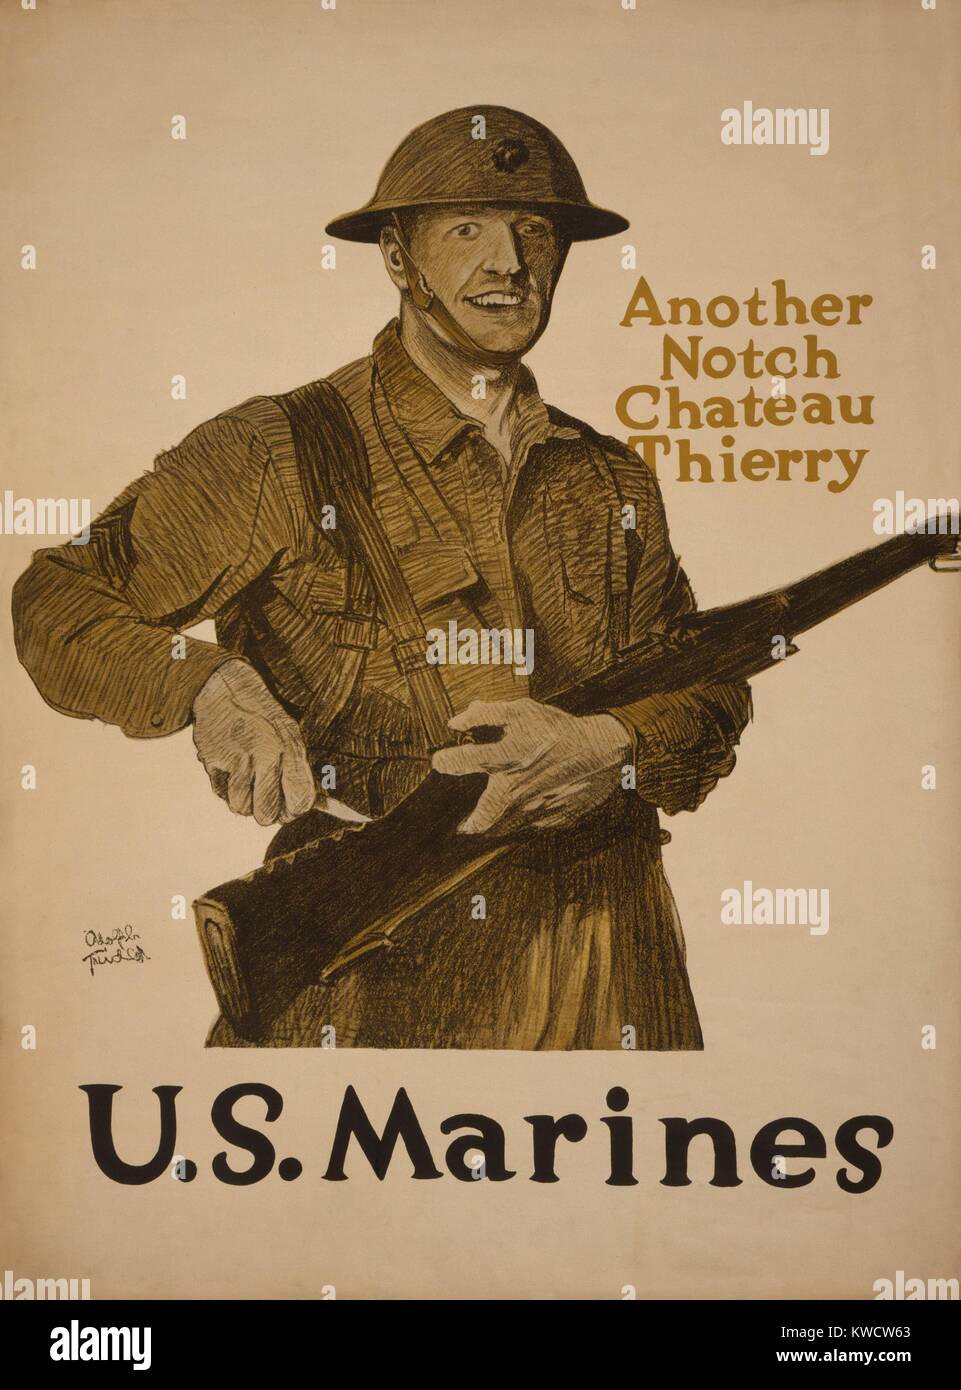 World War 1. Recruiting poster. Another notch, Chateau Thierry-U.S. Marines. U.S. Marines won the Battle of Chateau-Thierry, on July 18, 1918. It was one of the first actions of the American Expeditionary Force (AEF), which countered a German attack launched on July 15. (BSLOC 2013 1 184) Stock Photo